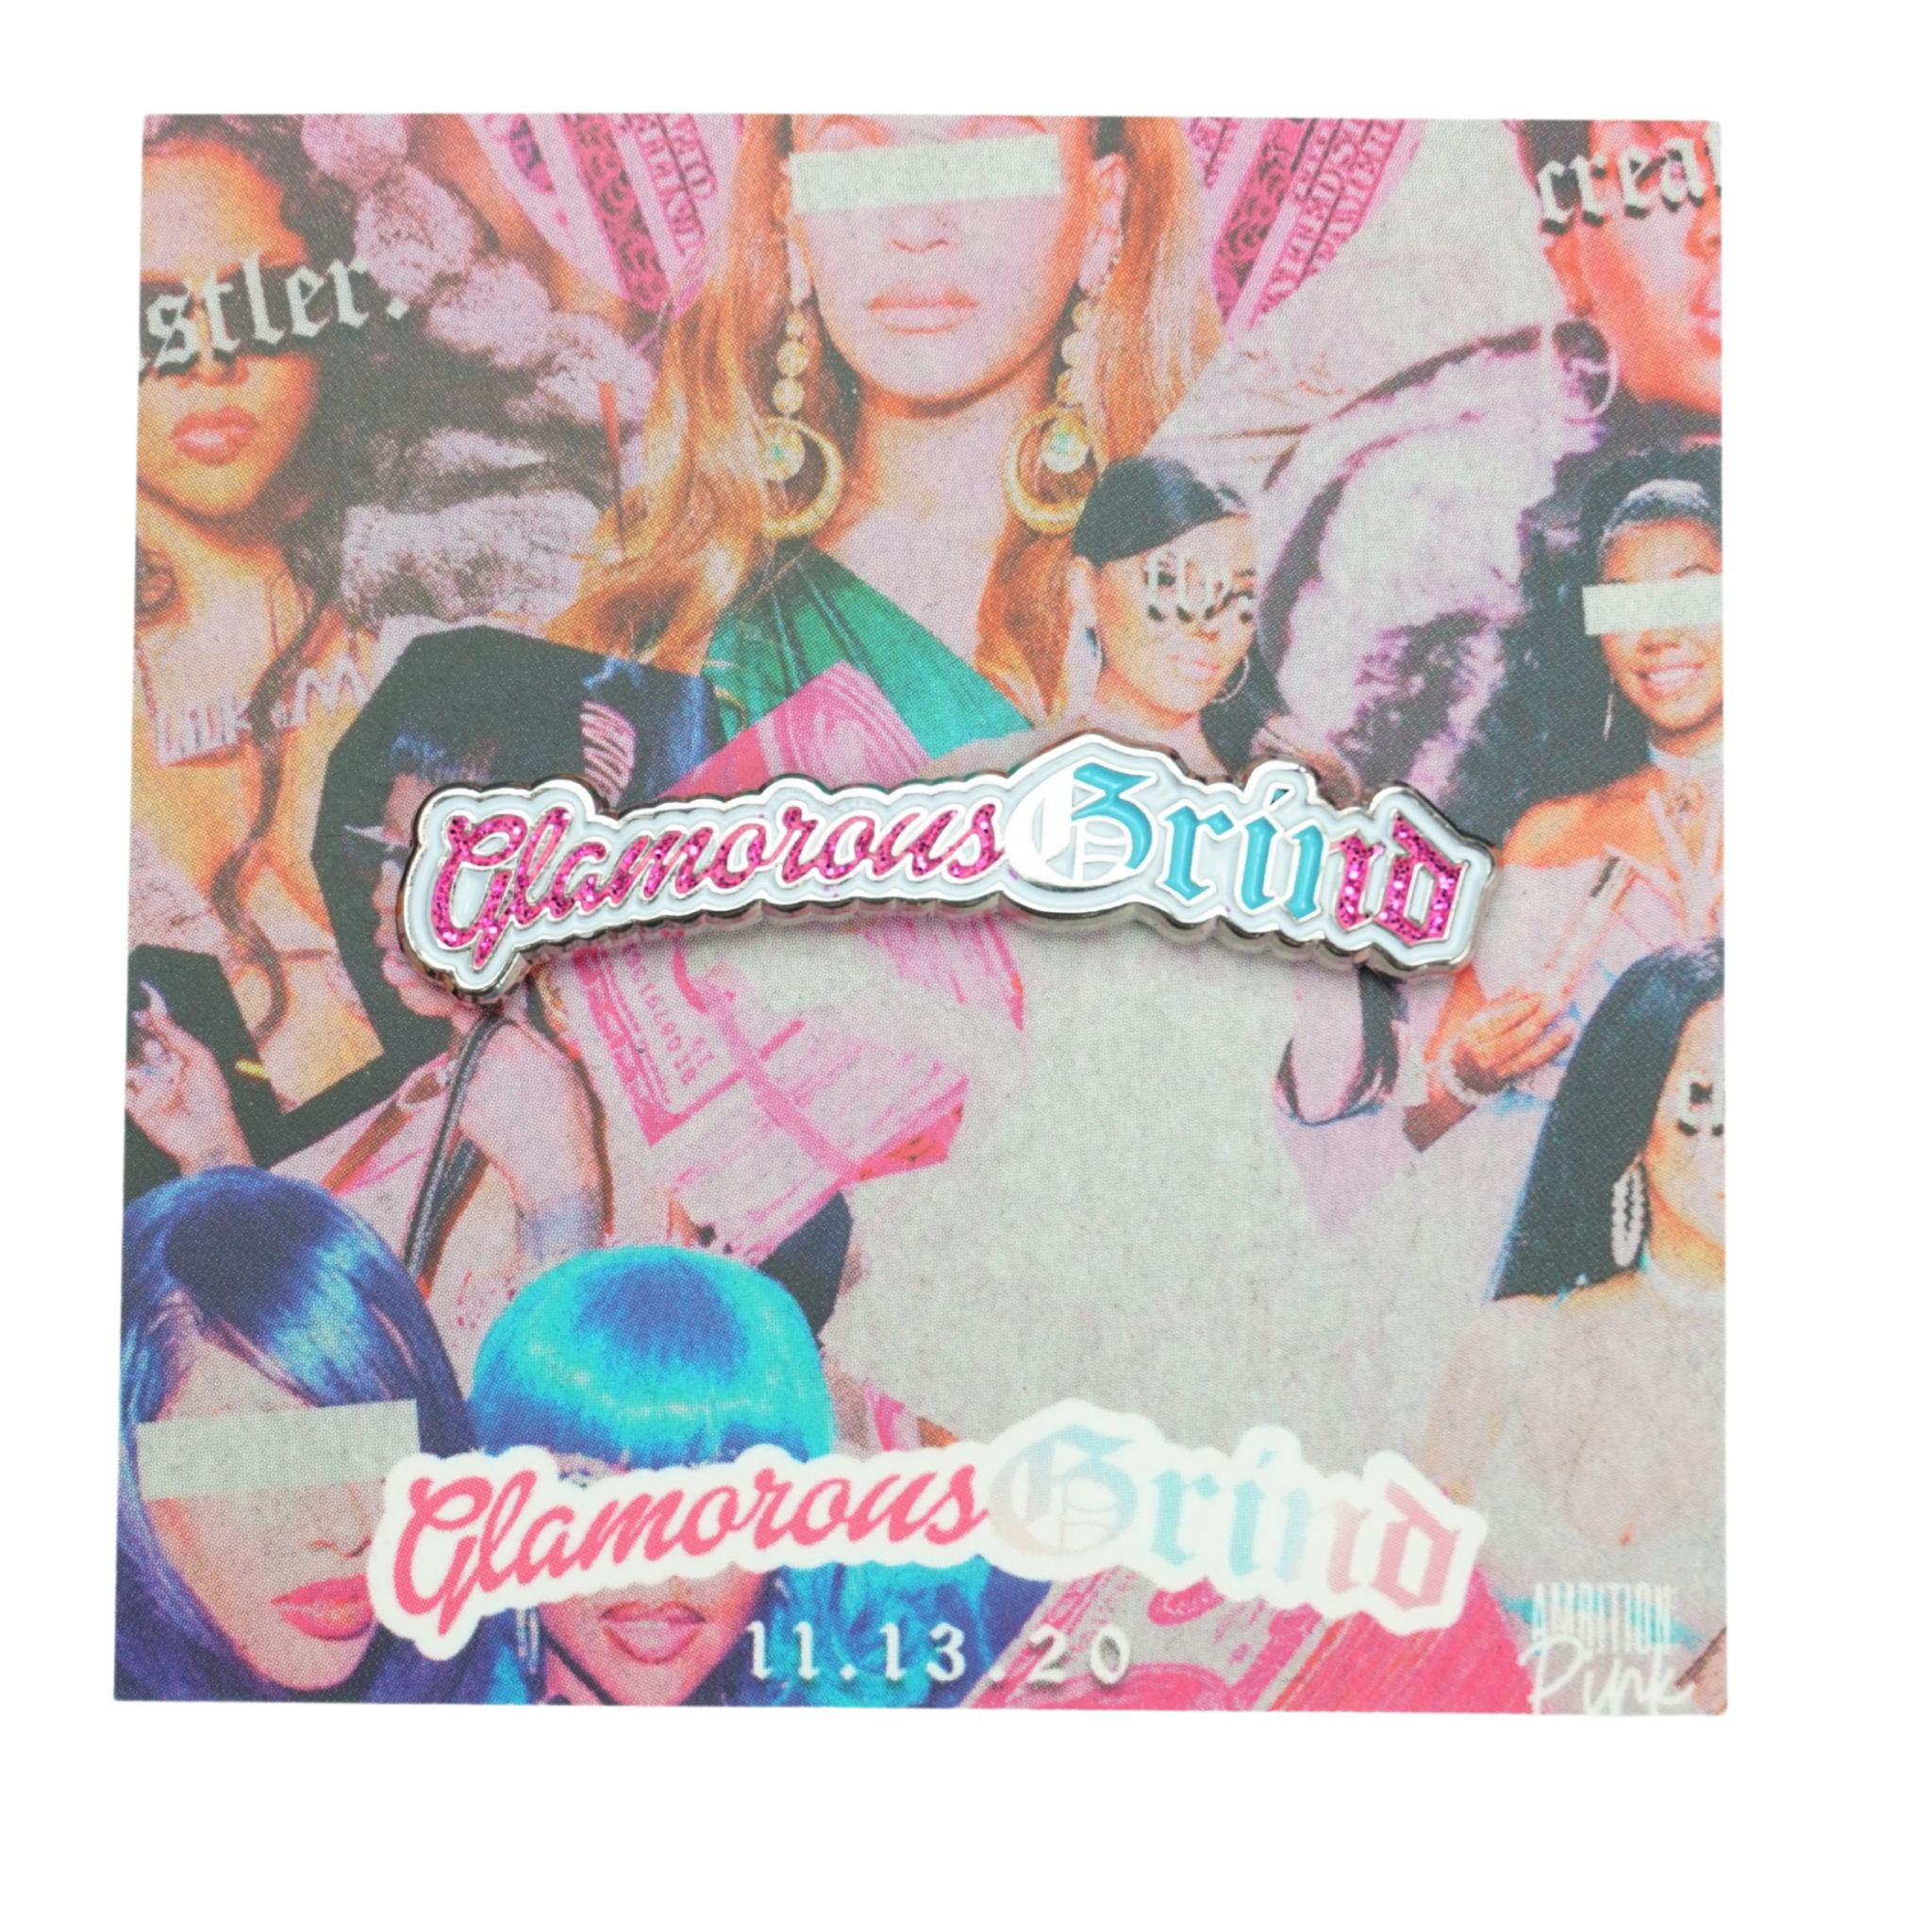 2.5" silver plated enamel pin words read Glamorous Grind. "Glamorous" text in soft hot pink glitter & "Grind" text in multi colors blue and pink